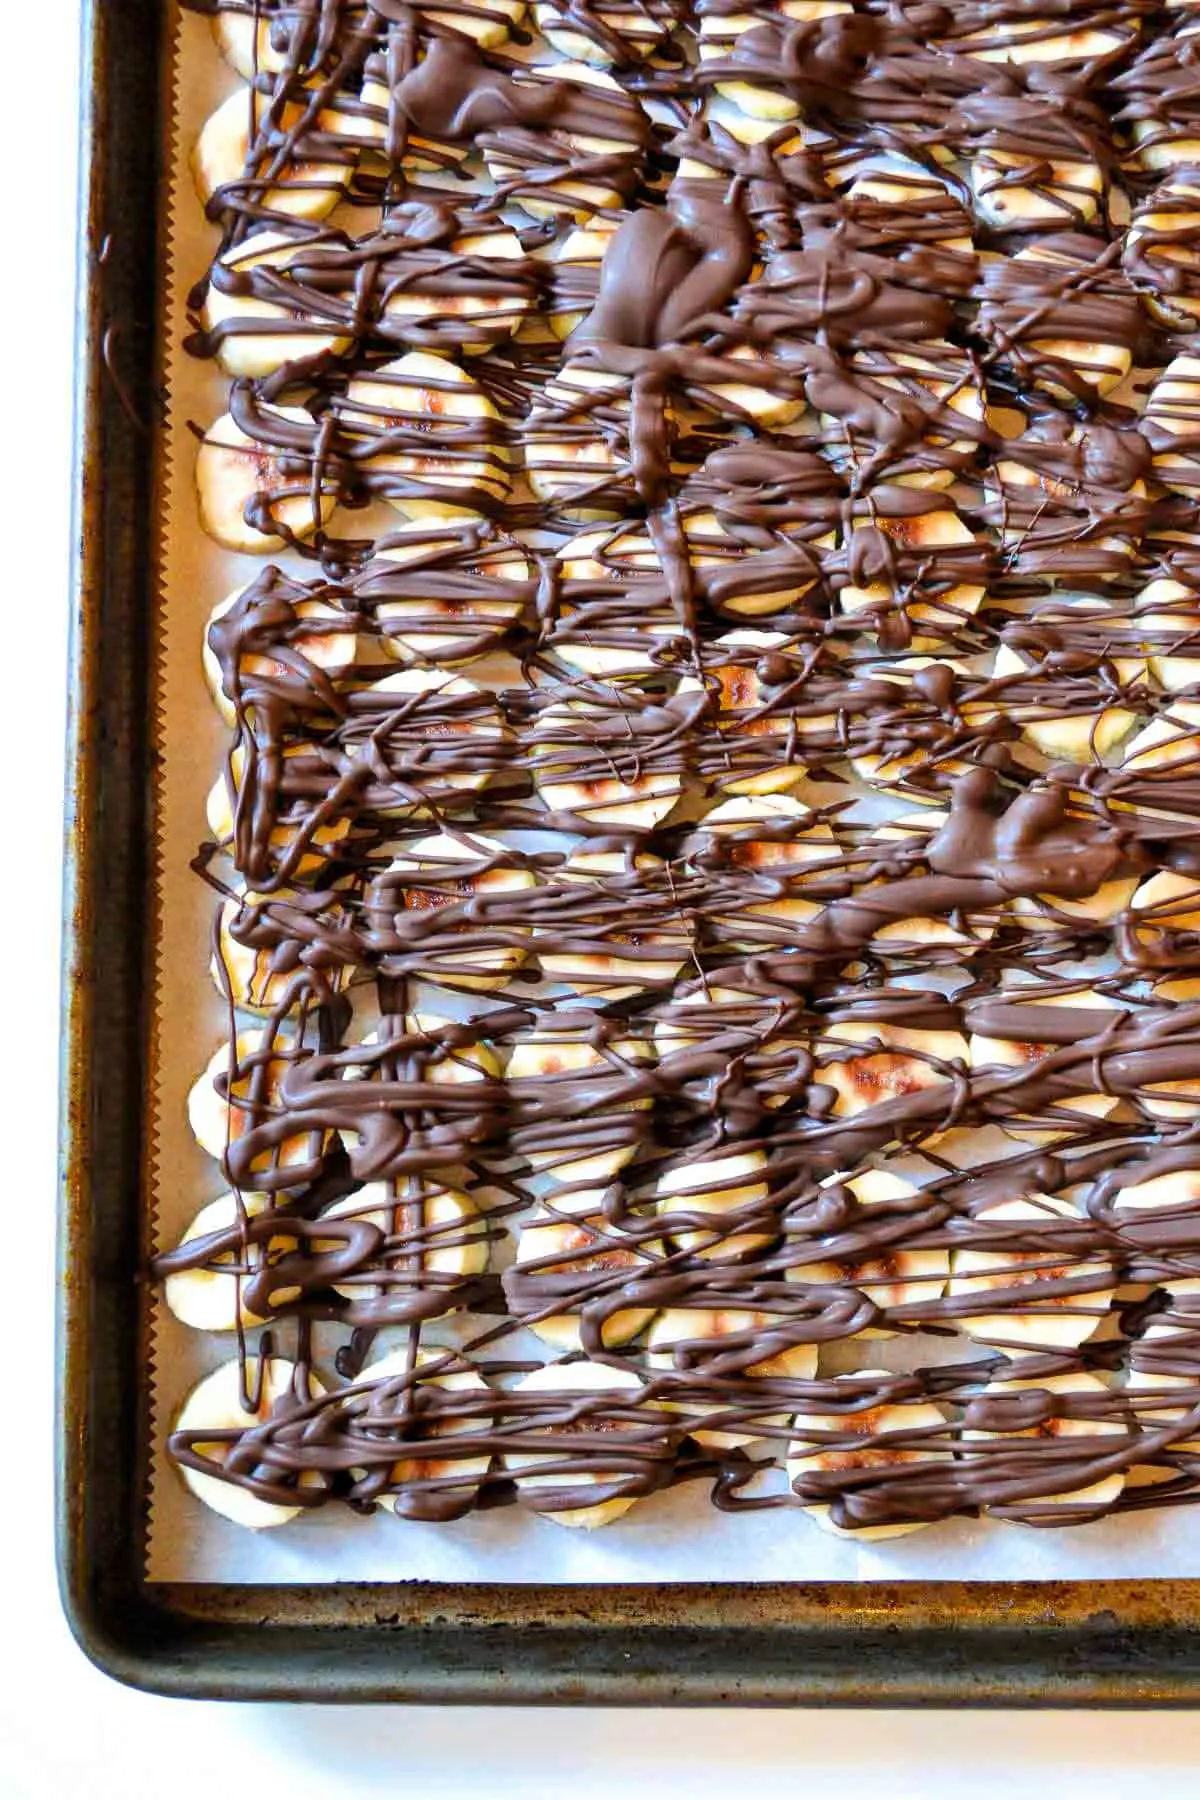 Tray of frozen bananas drizzled with chocolate